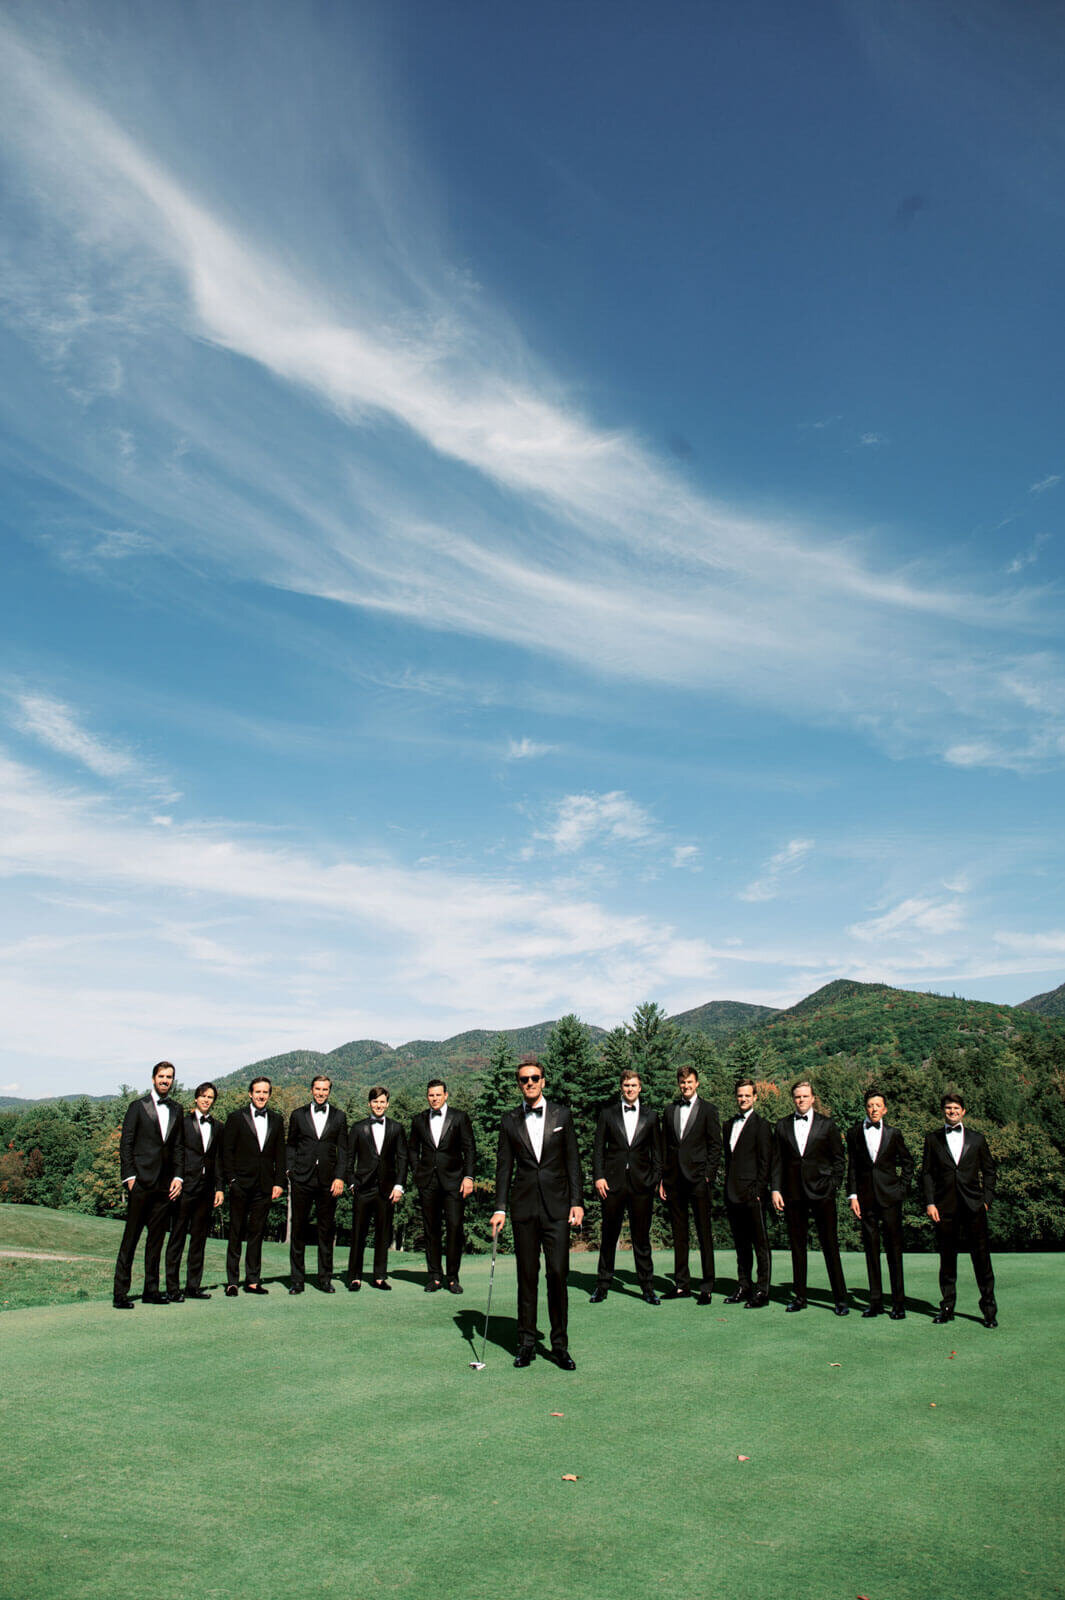 The groom is with twelve other men in black suits at The Ausable Club, New York, with mountains and sky in the background.